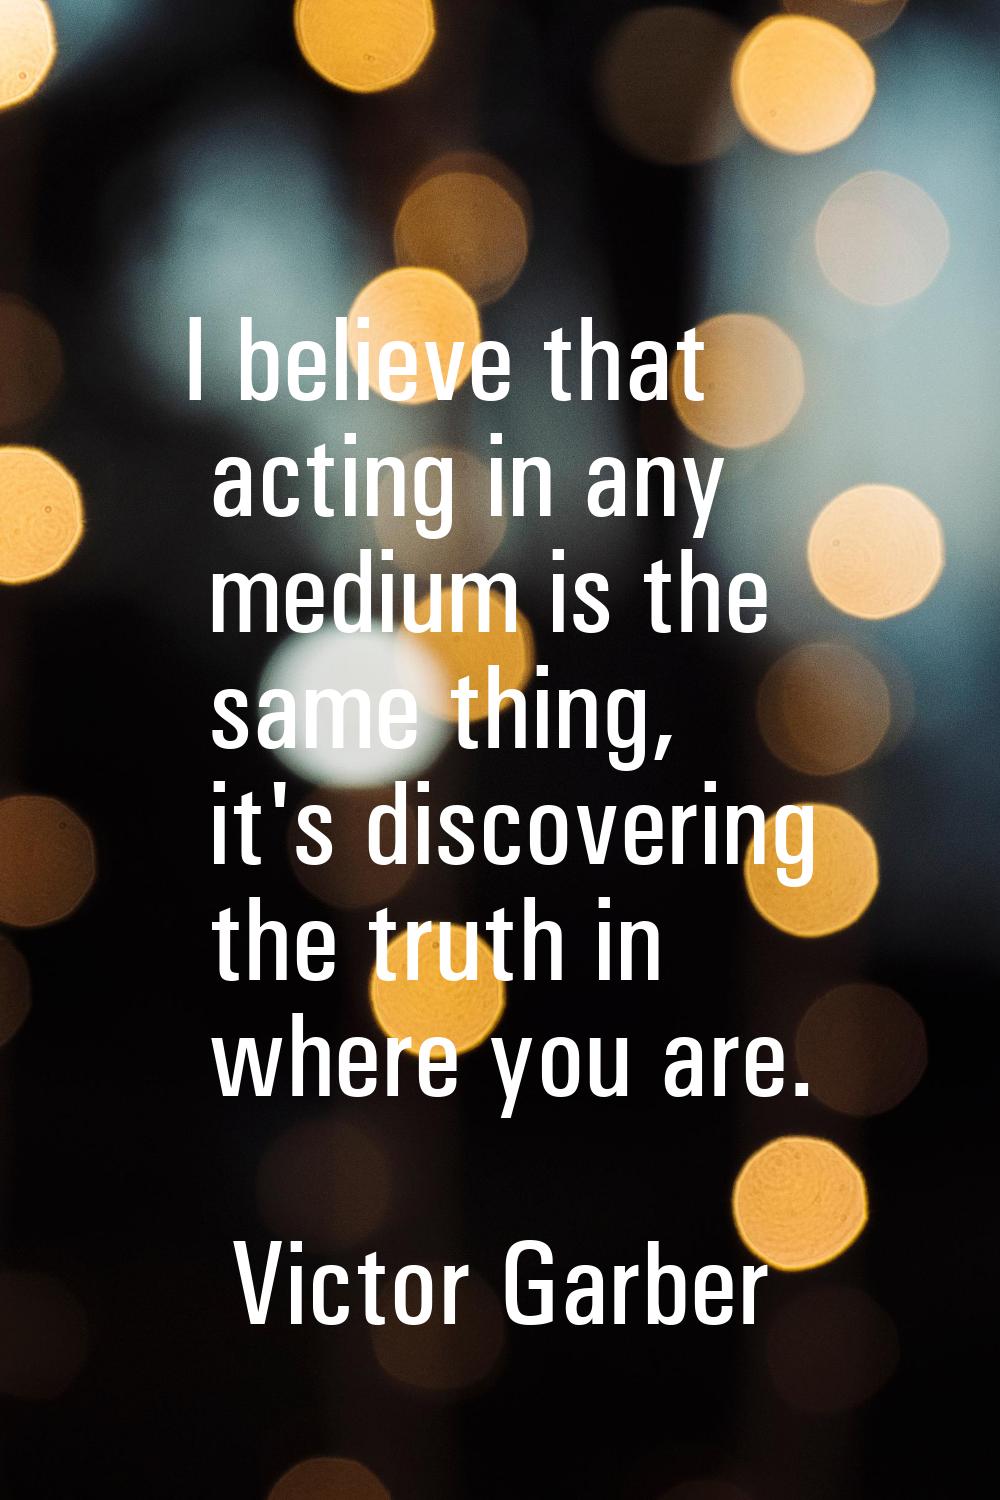 I believe that acting in any medium is the same thing, it's discovering the truth in where you are.